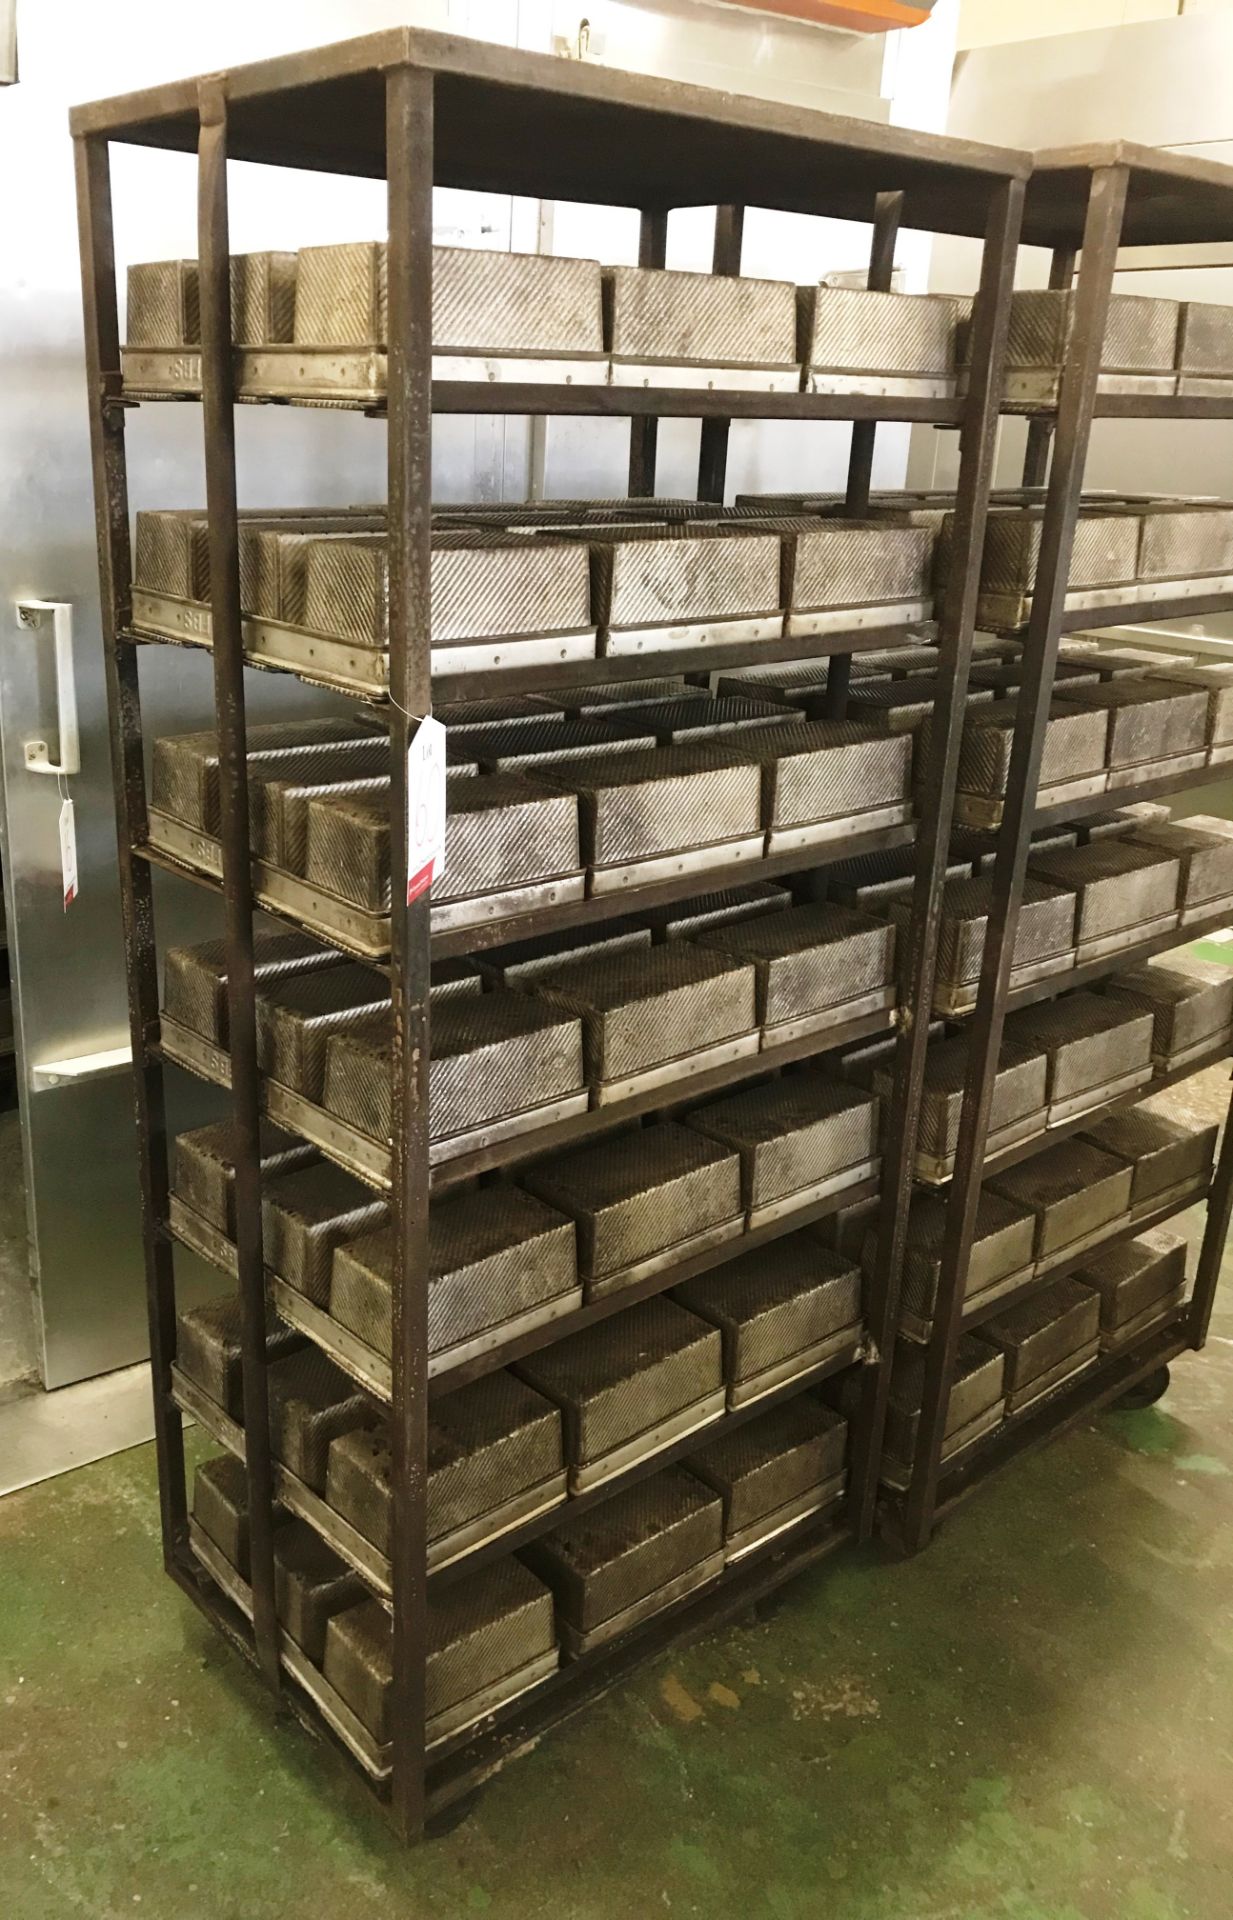 16 x 7 Level Bakery Racks w/ 3 Loaf Baking Tins - Approx 300+ Tins - Image 2 of 5